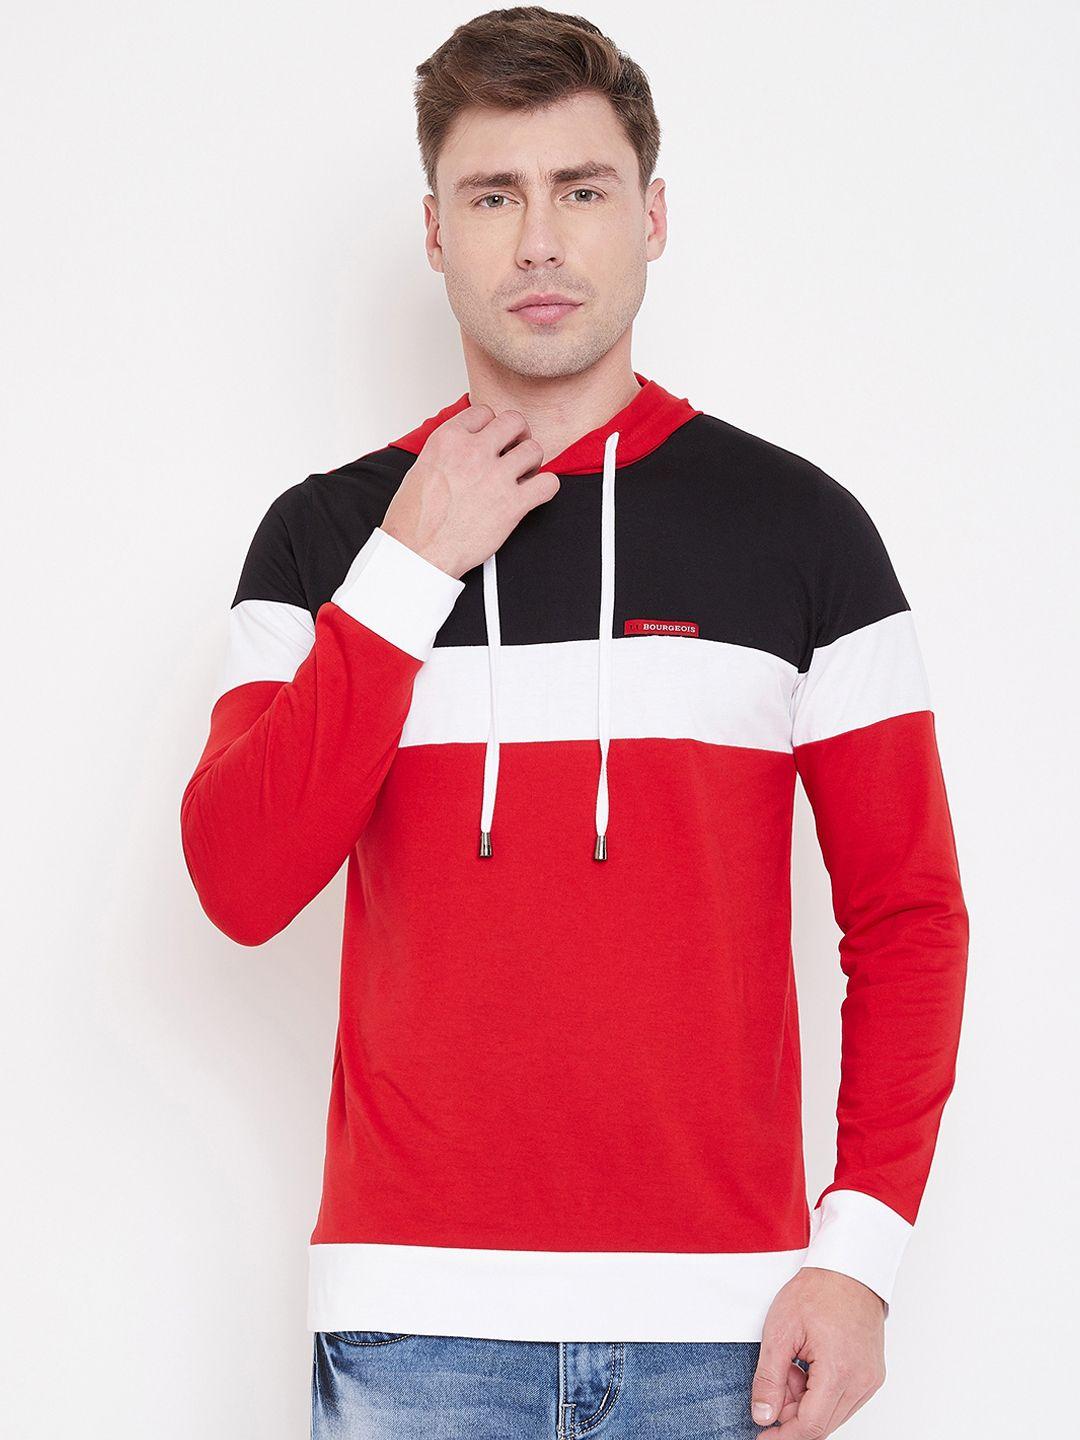 le bourgeois men black and red colourblocked hood t-shirt